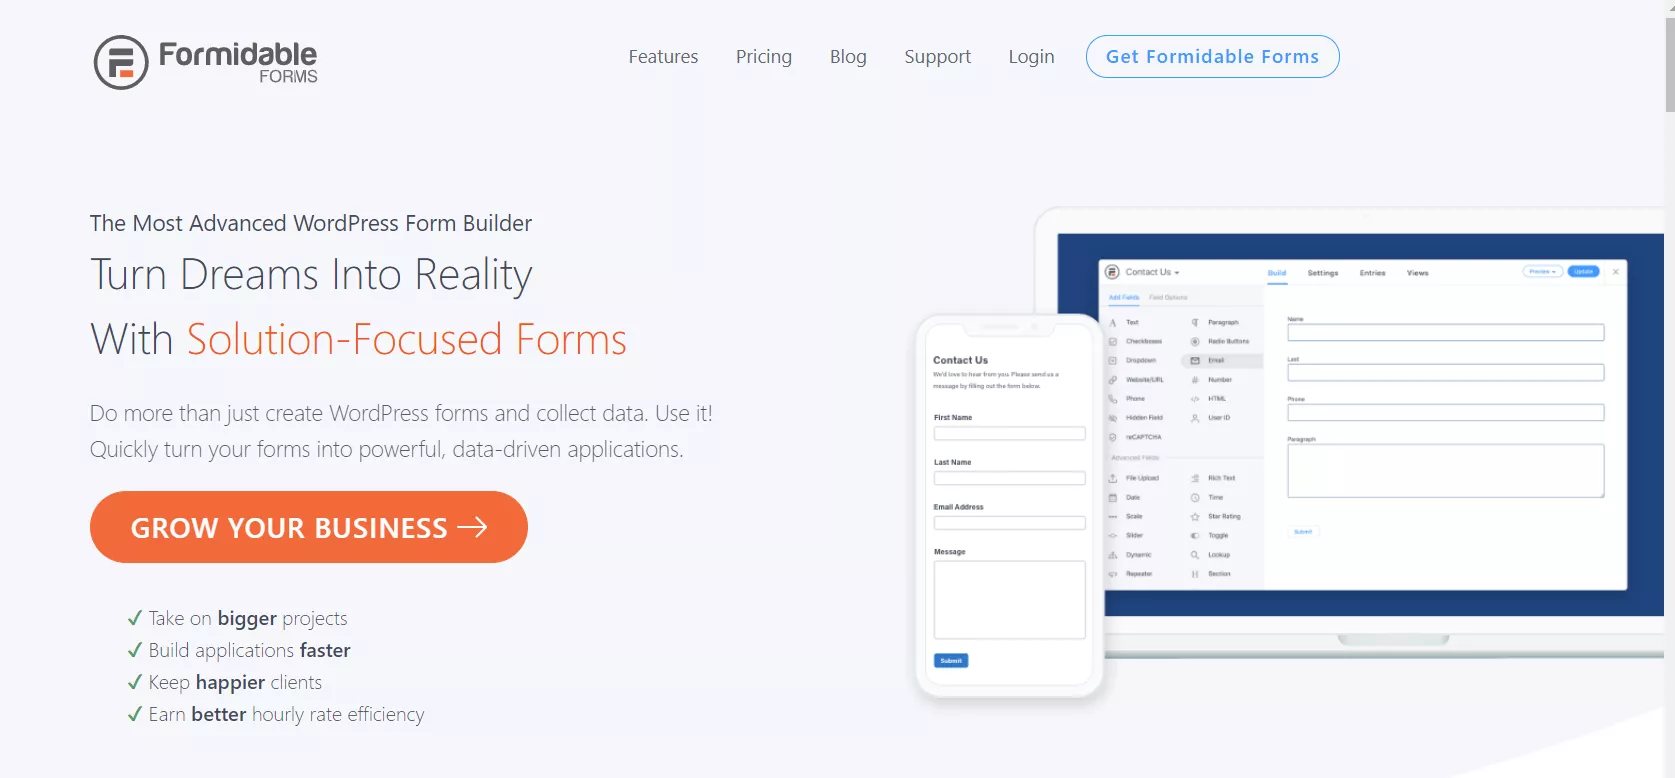 Formidable forms homepage